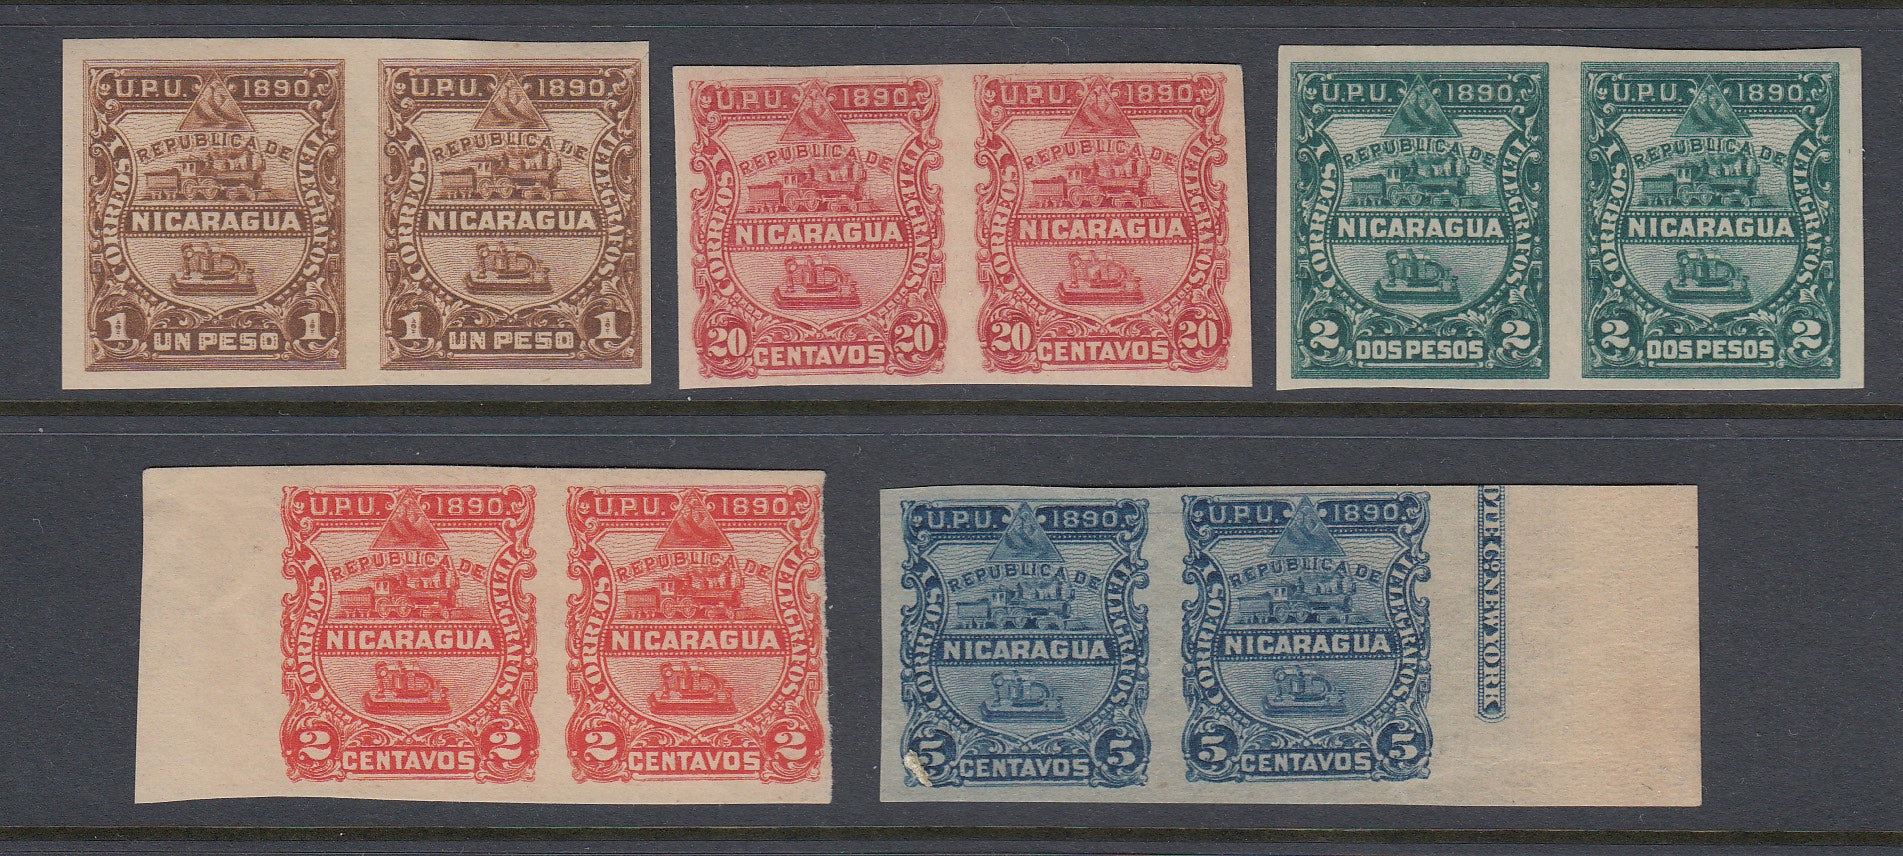 Nicaragua 1890 Imperf Proof Pairs in Issued Colors VLM Mint. Scott 21-27 var